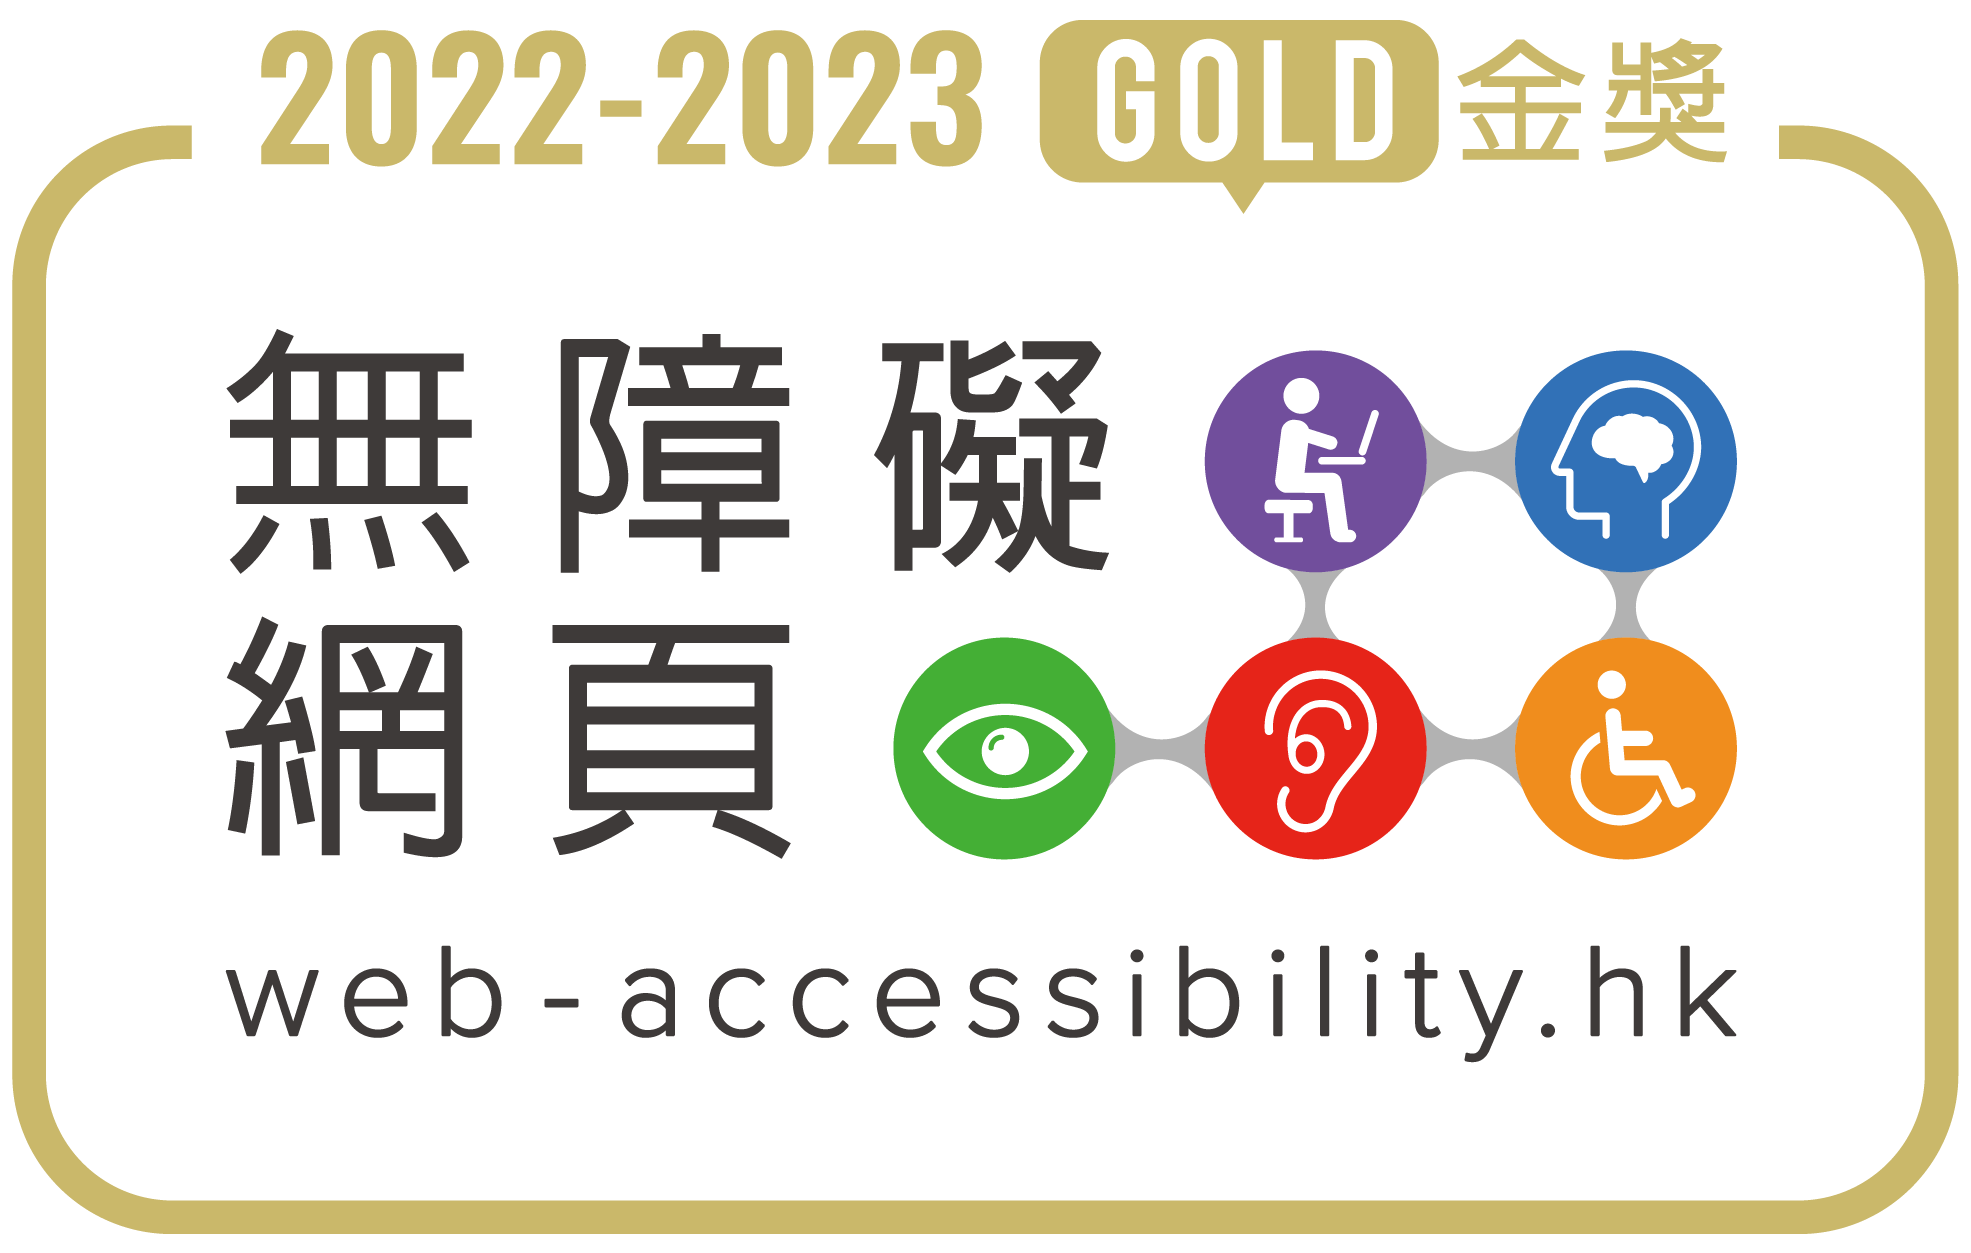 Web Accessibility Recognition - Gold Award